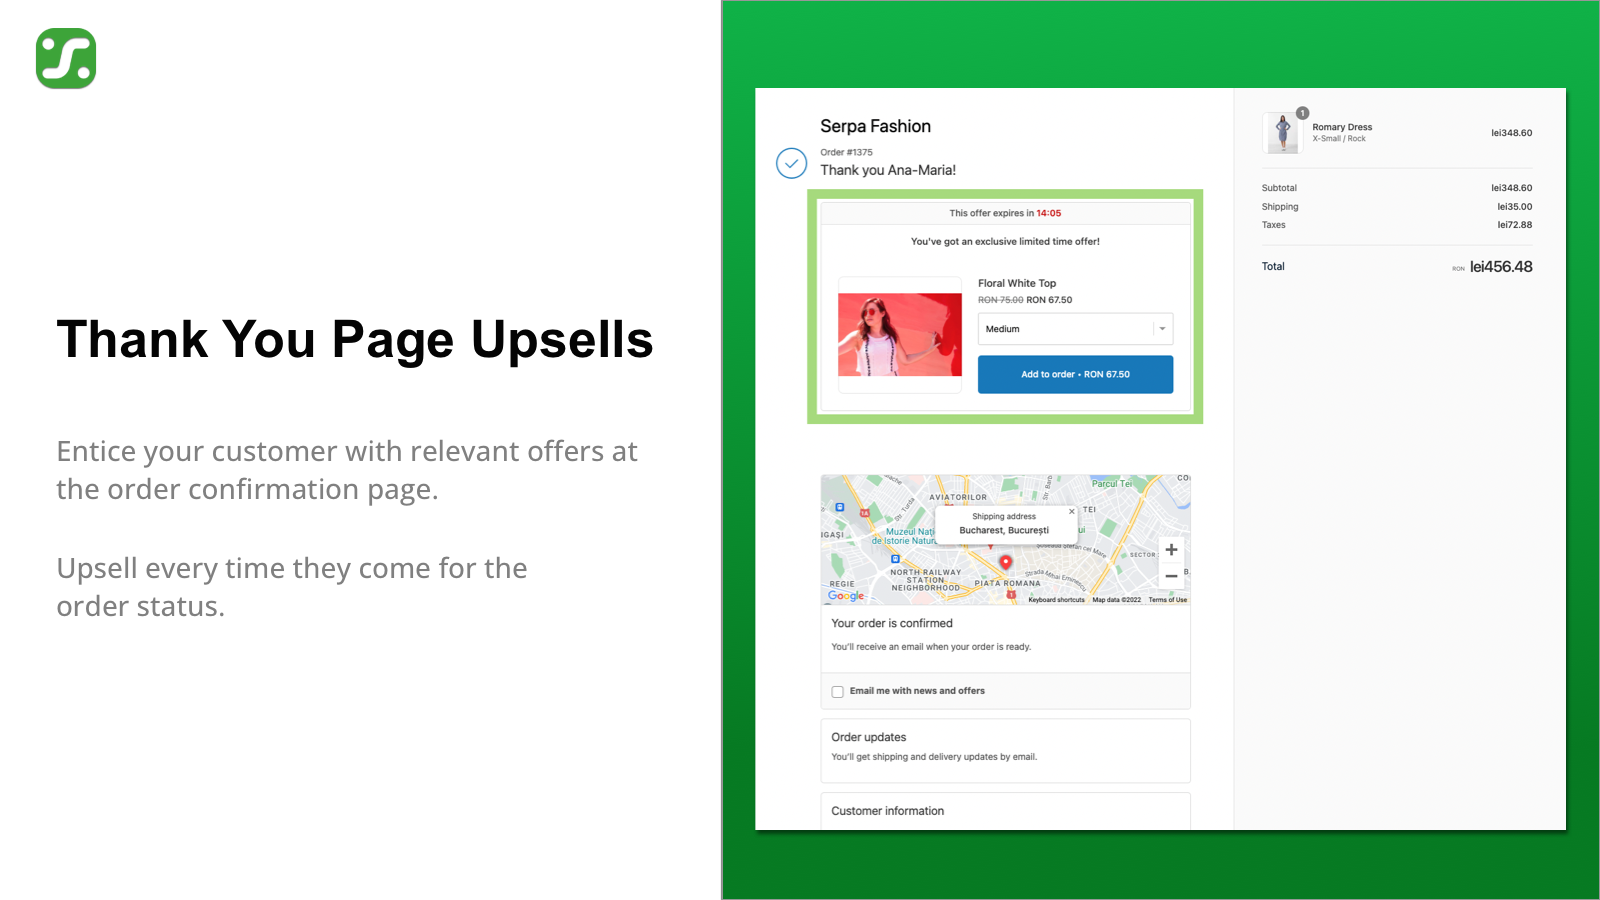 Thank You Page Upsells